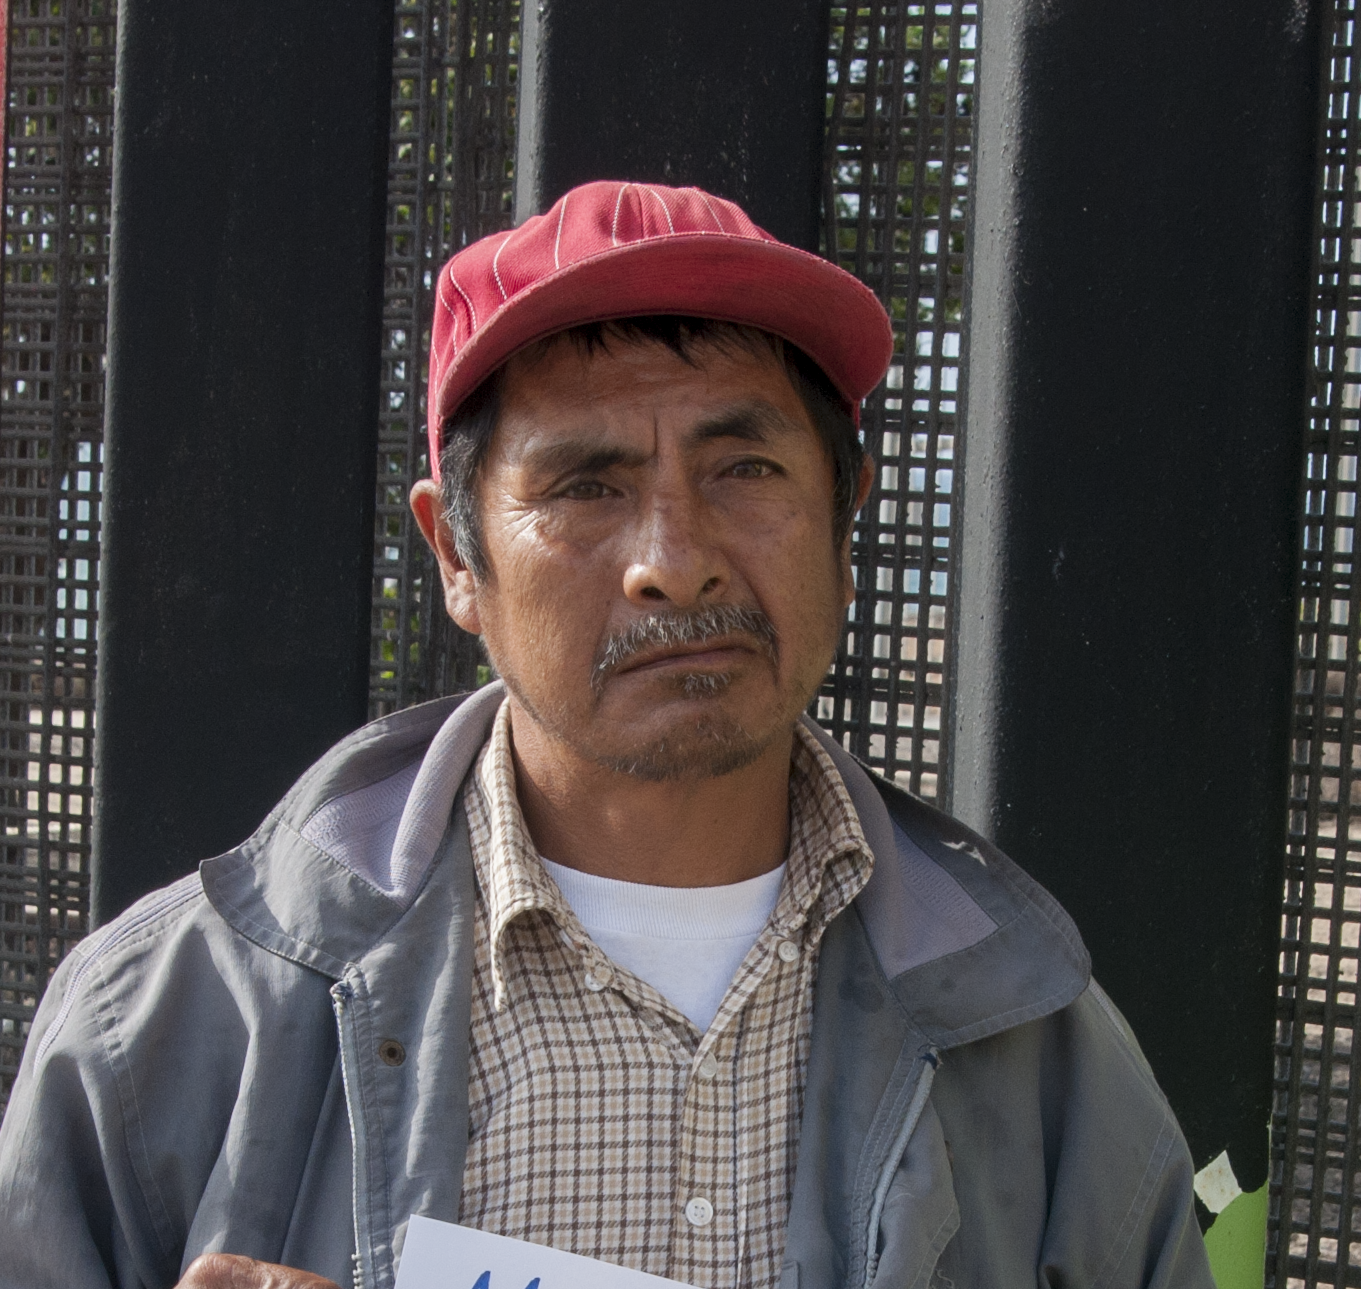 Feeling powerless: one deported migrant’s story from Tijuana